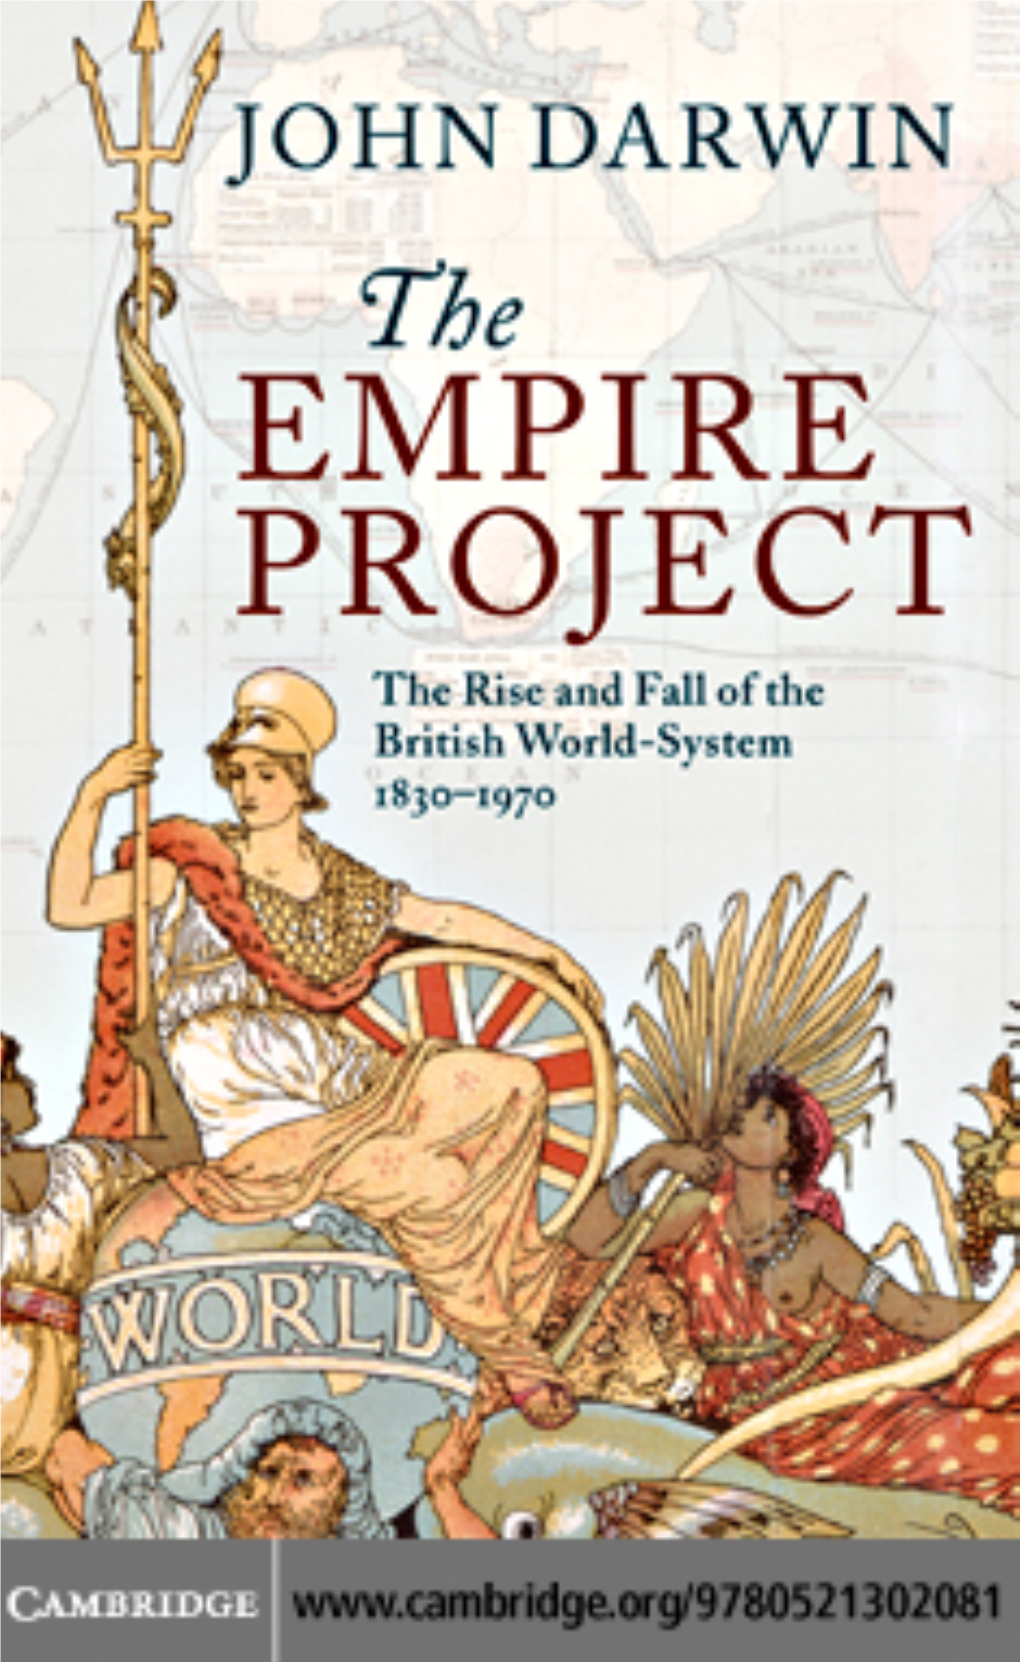 THE EMPIRE PROJECT: the Rise and Fall of the British